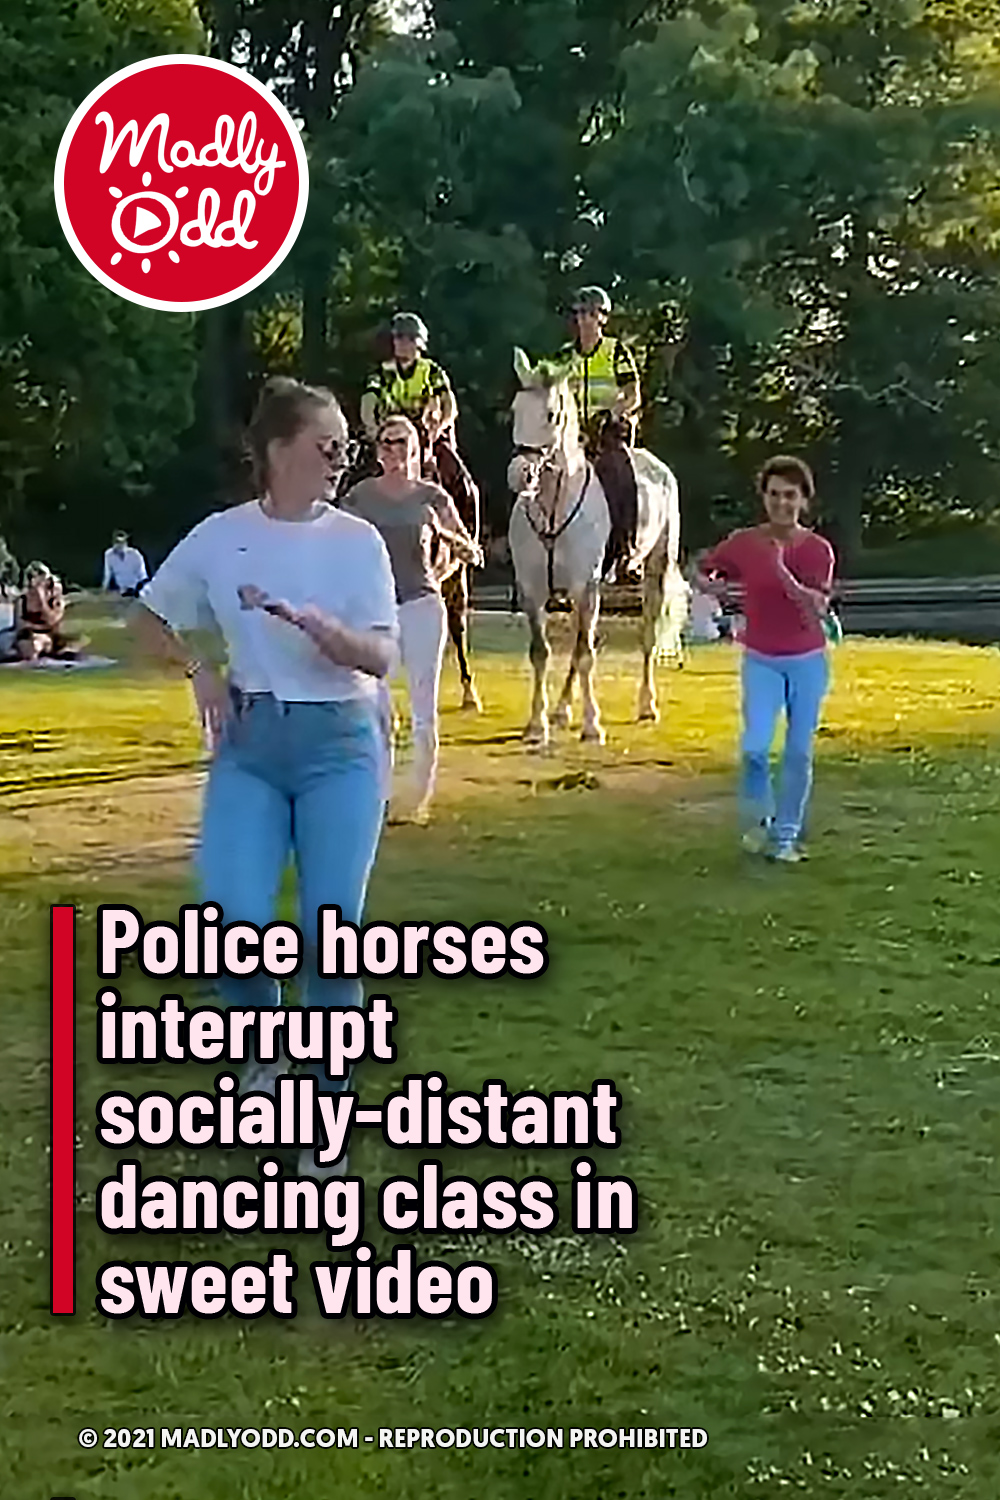 Police horses interrupt socially-distant dancing class in sweet video